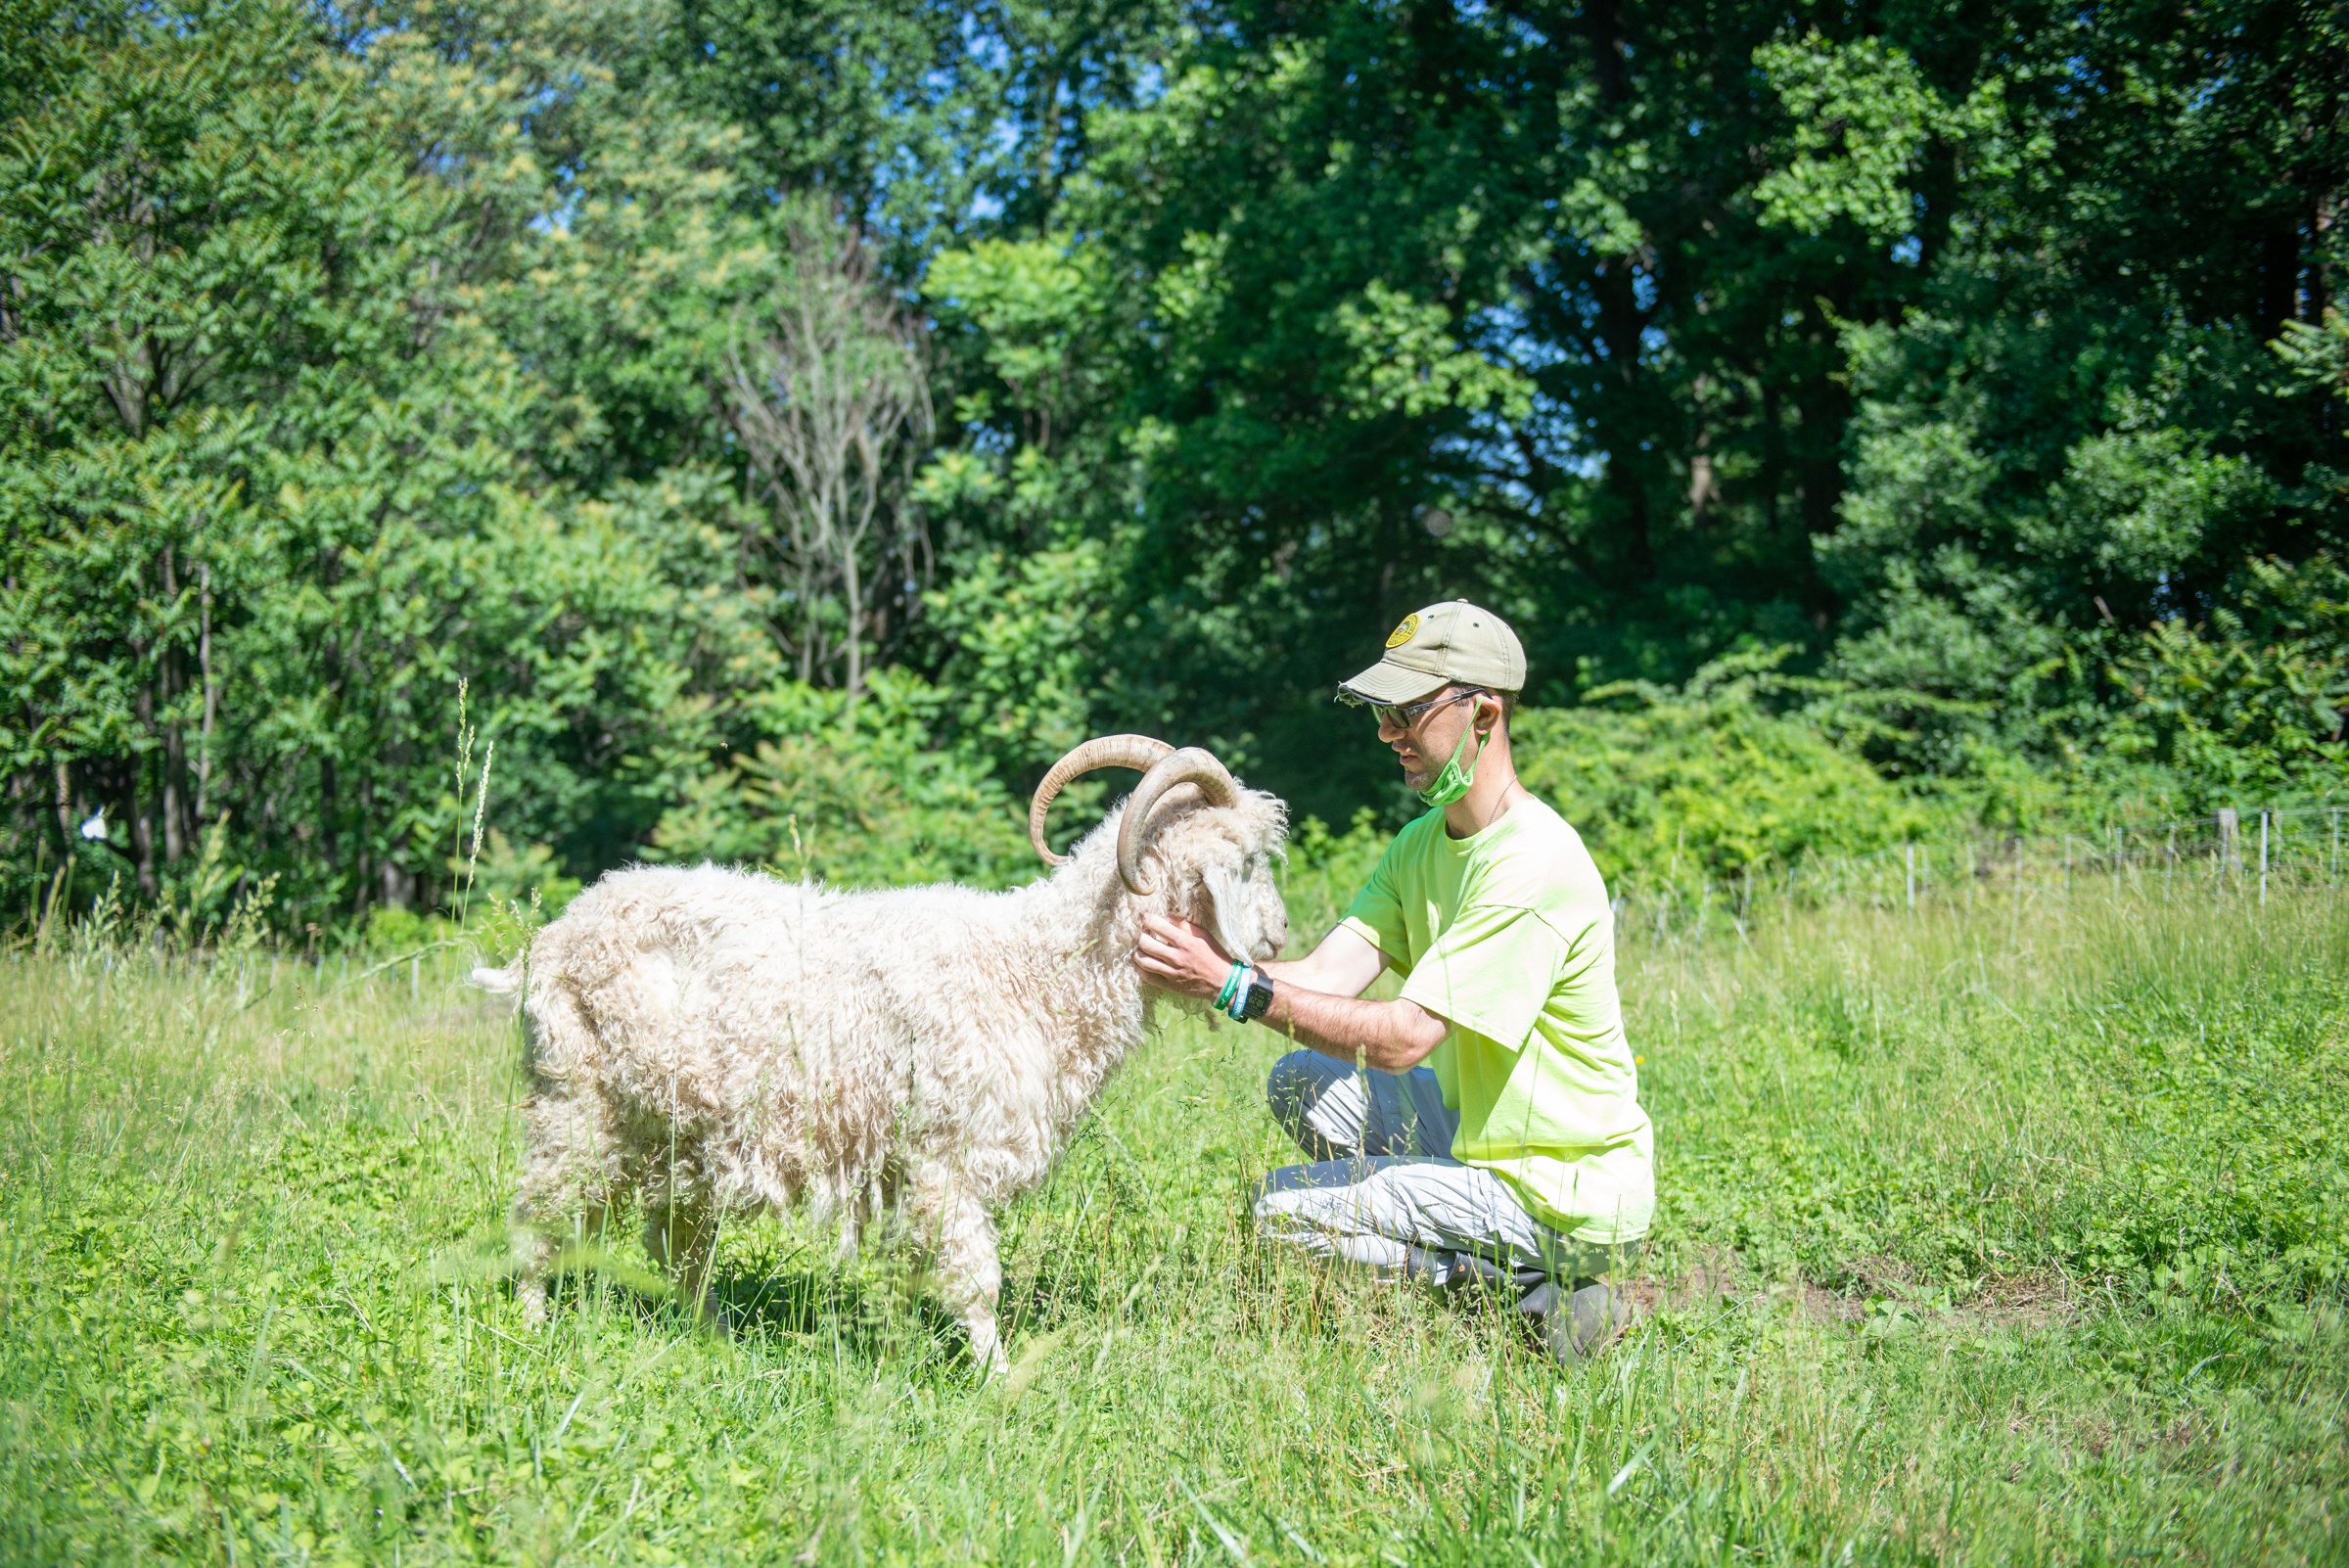 Michael S. spending time with Soltane's angora goat, Pete, at Nantmel Farm on Soltane's campus.